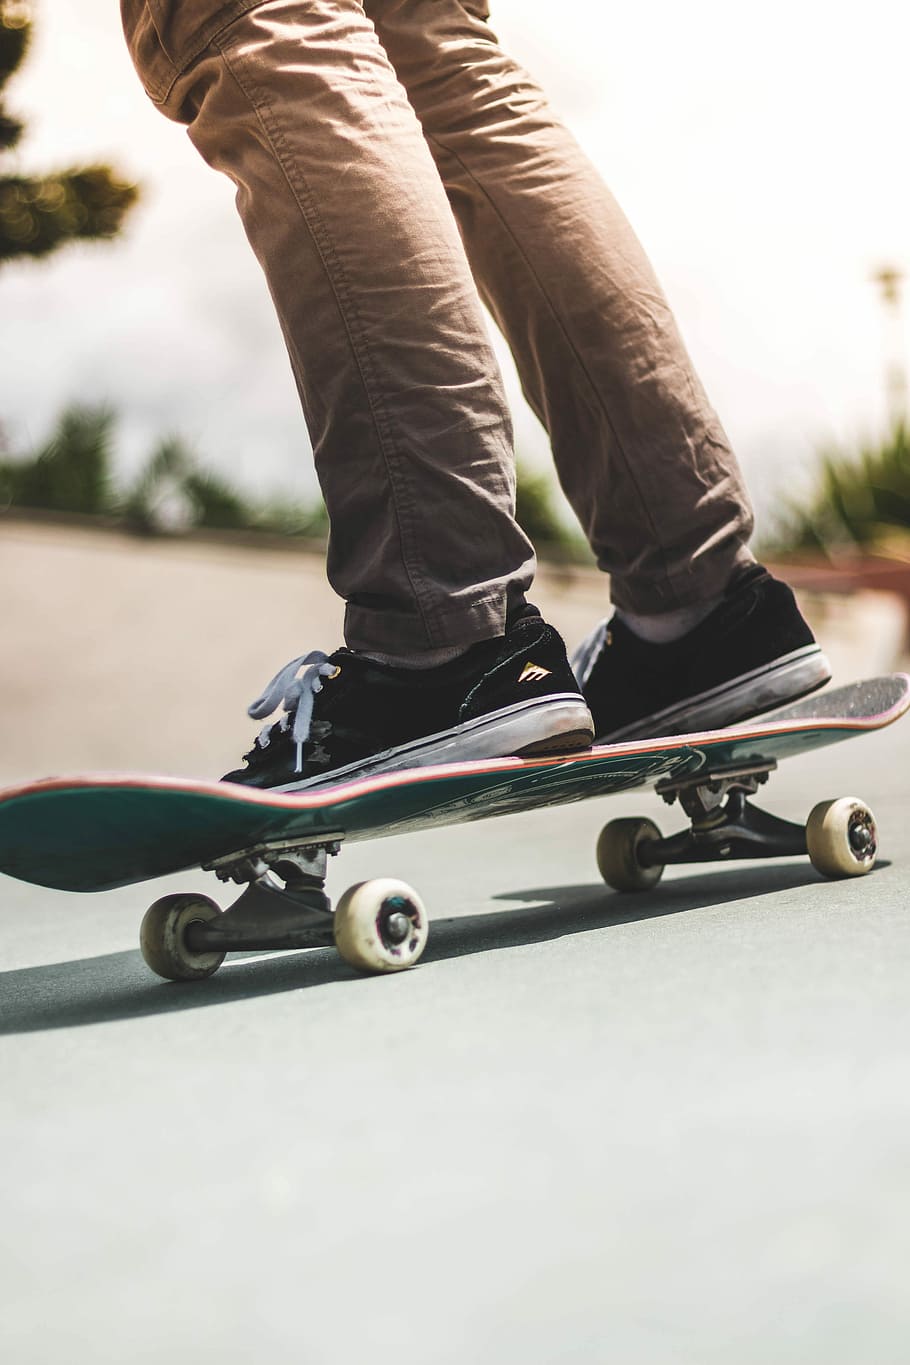 person wearing pair of black-and-white Easton low-top sneakers and brown pants while riding on brown and black skateboard on gray concrete road during daytime, HD wallpaper